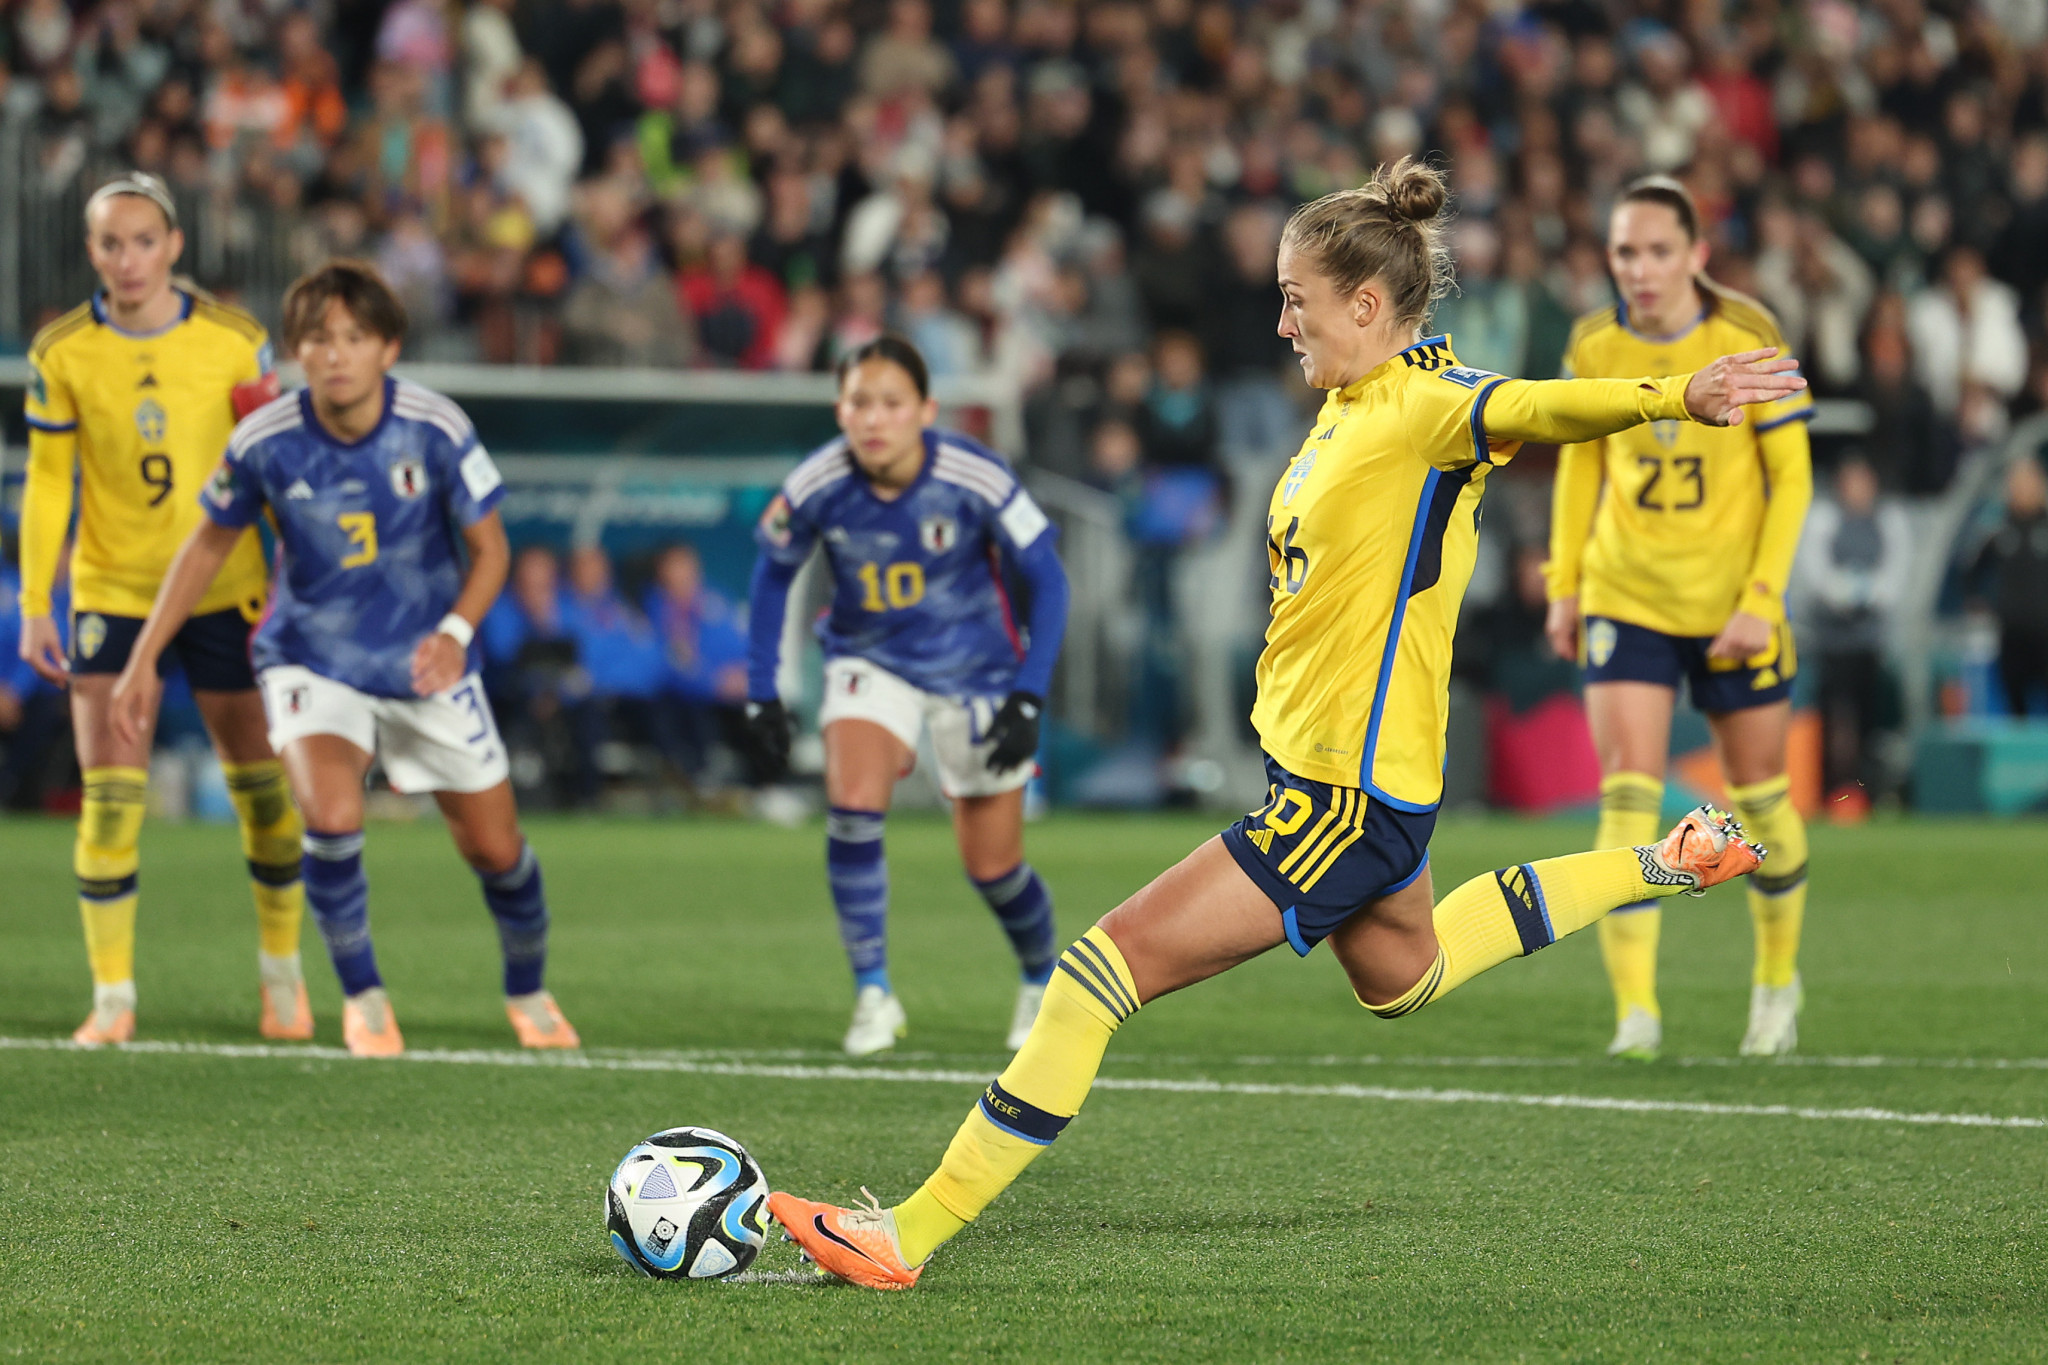 Sweden's Filippa Angeldal scored the 50th minute penalty for Sweden which proved to be the winner in her country's 2-1 victory over 2011 FIFA Women's World Cup champions Japan ©Getty Images